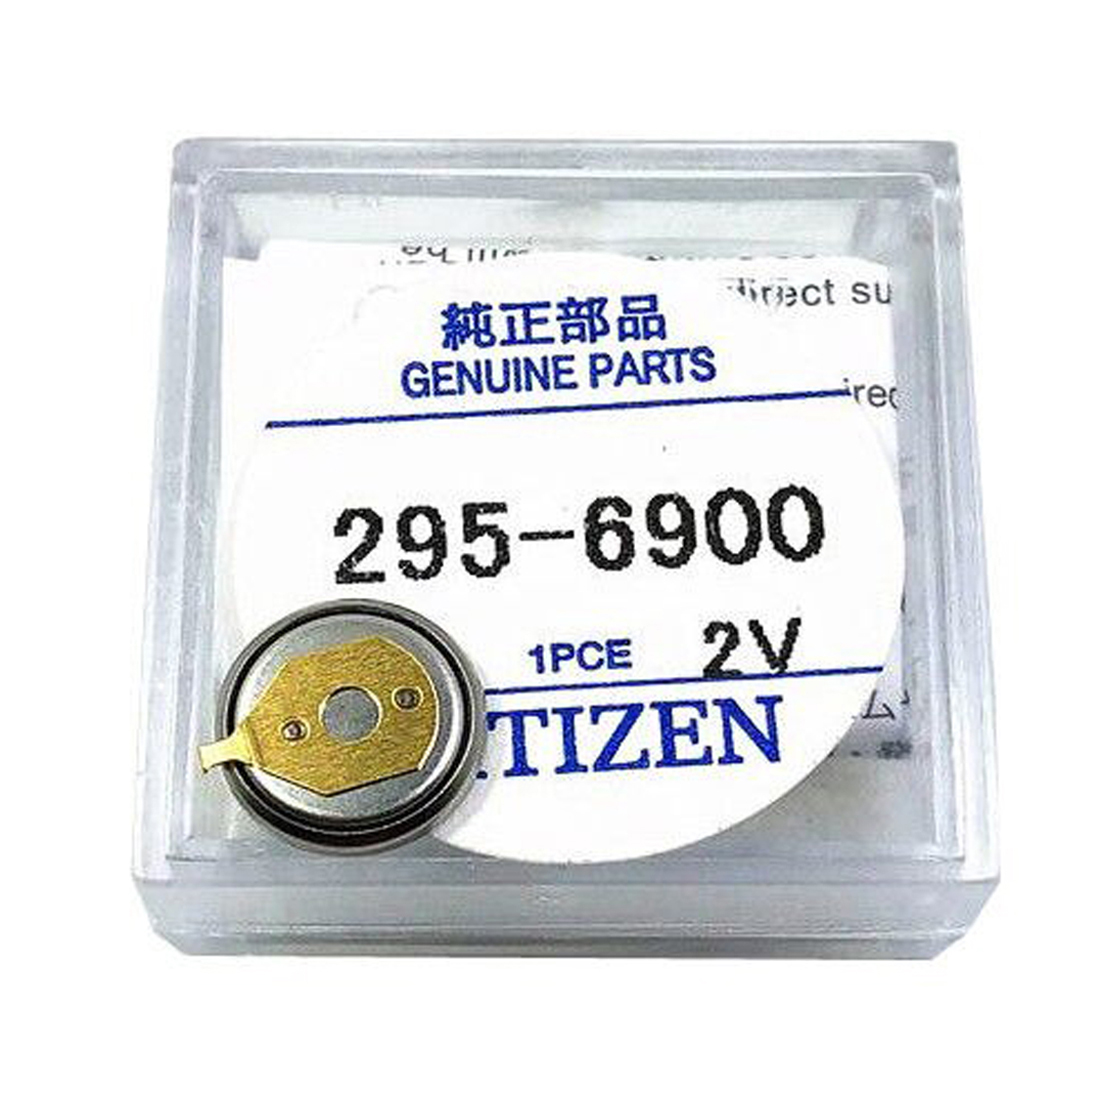 Citizen 295-55 Eco Drive Capacitor Battery 